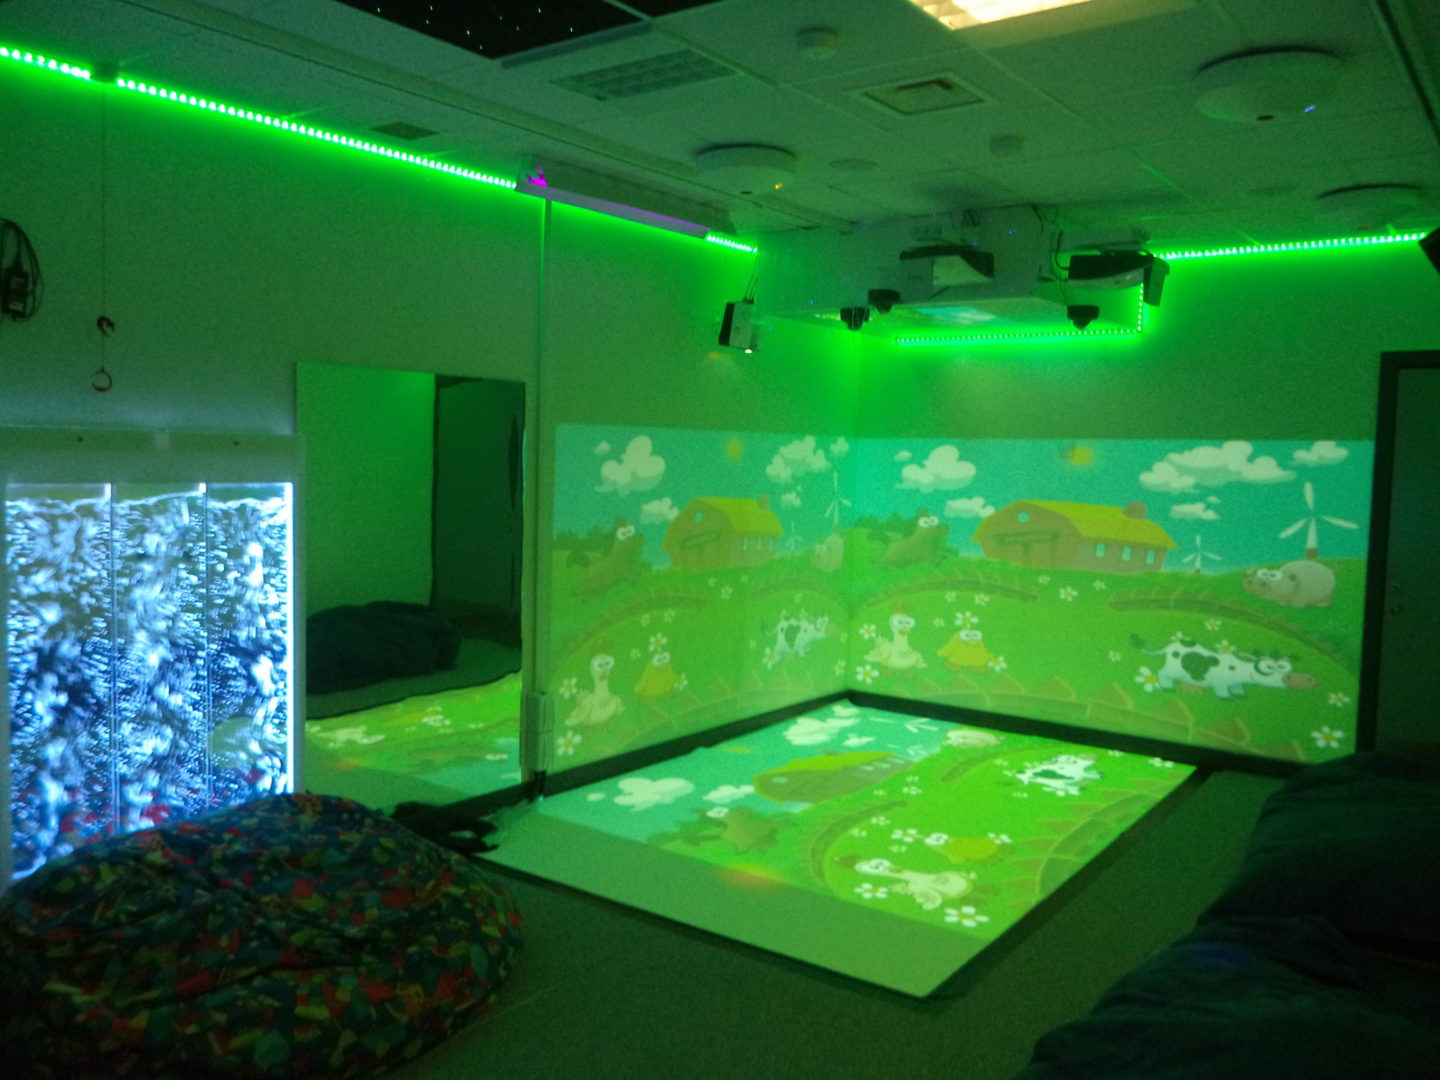 fully interactive immersive corner including interactive walls interactive floor, ceiling projection and a DMX RGB bubble wall